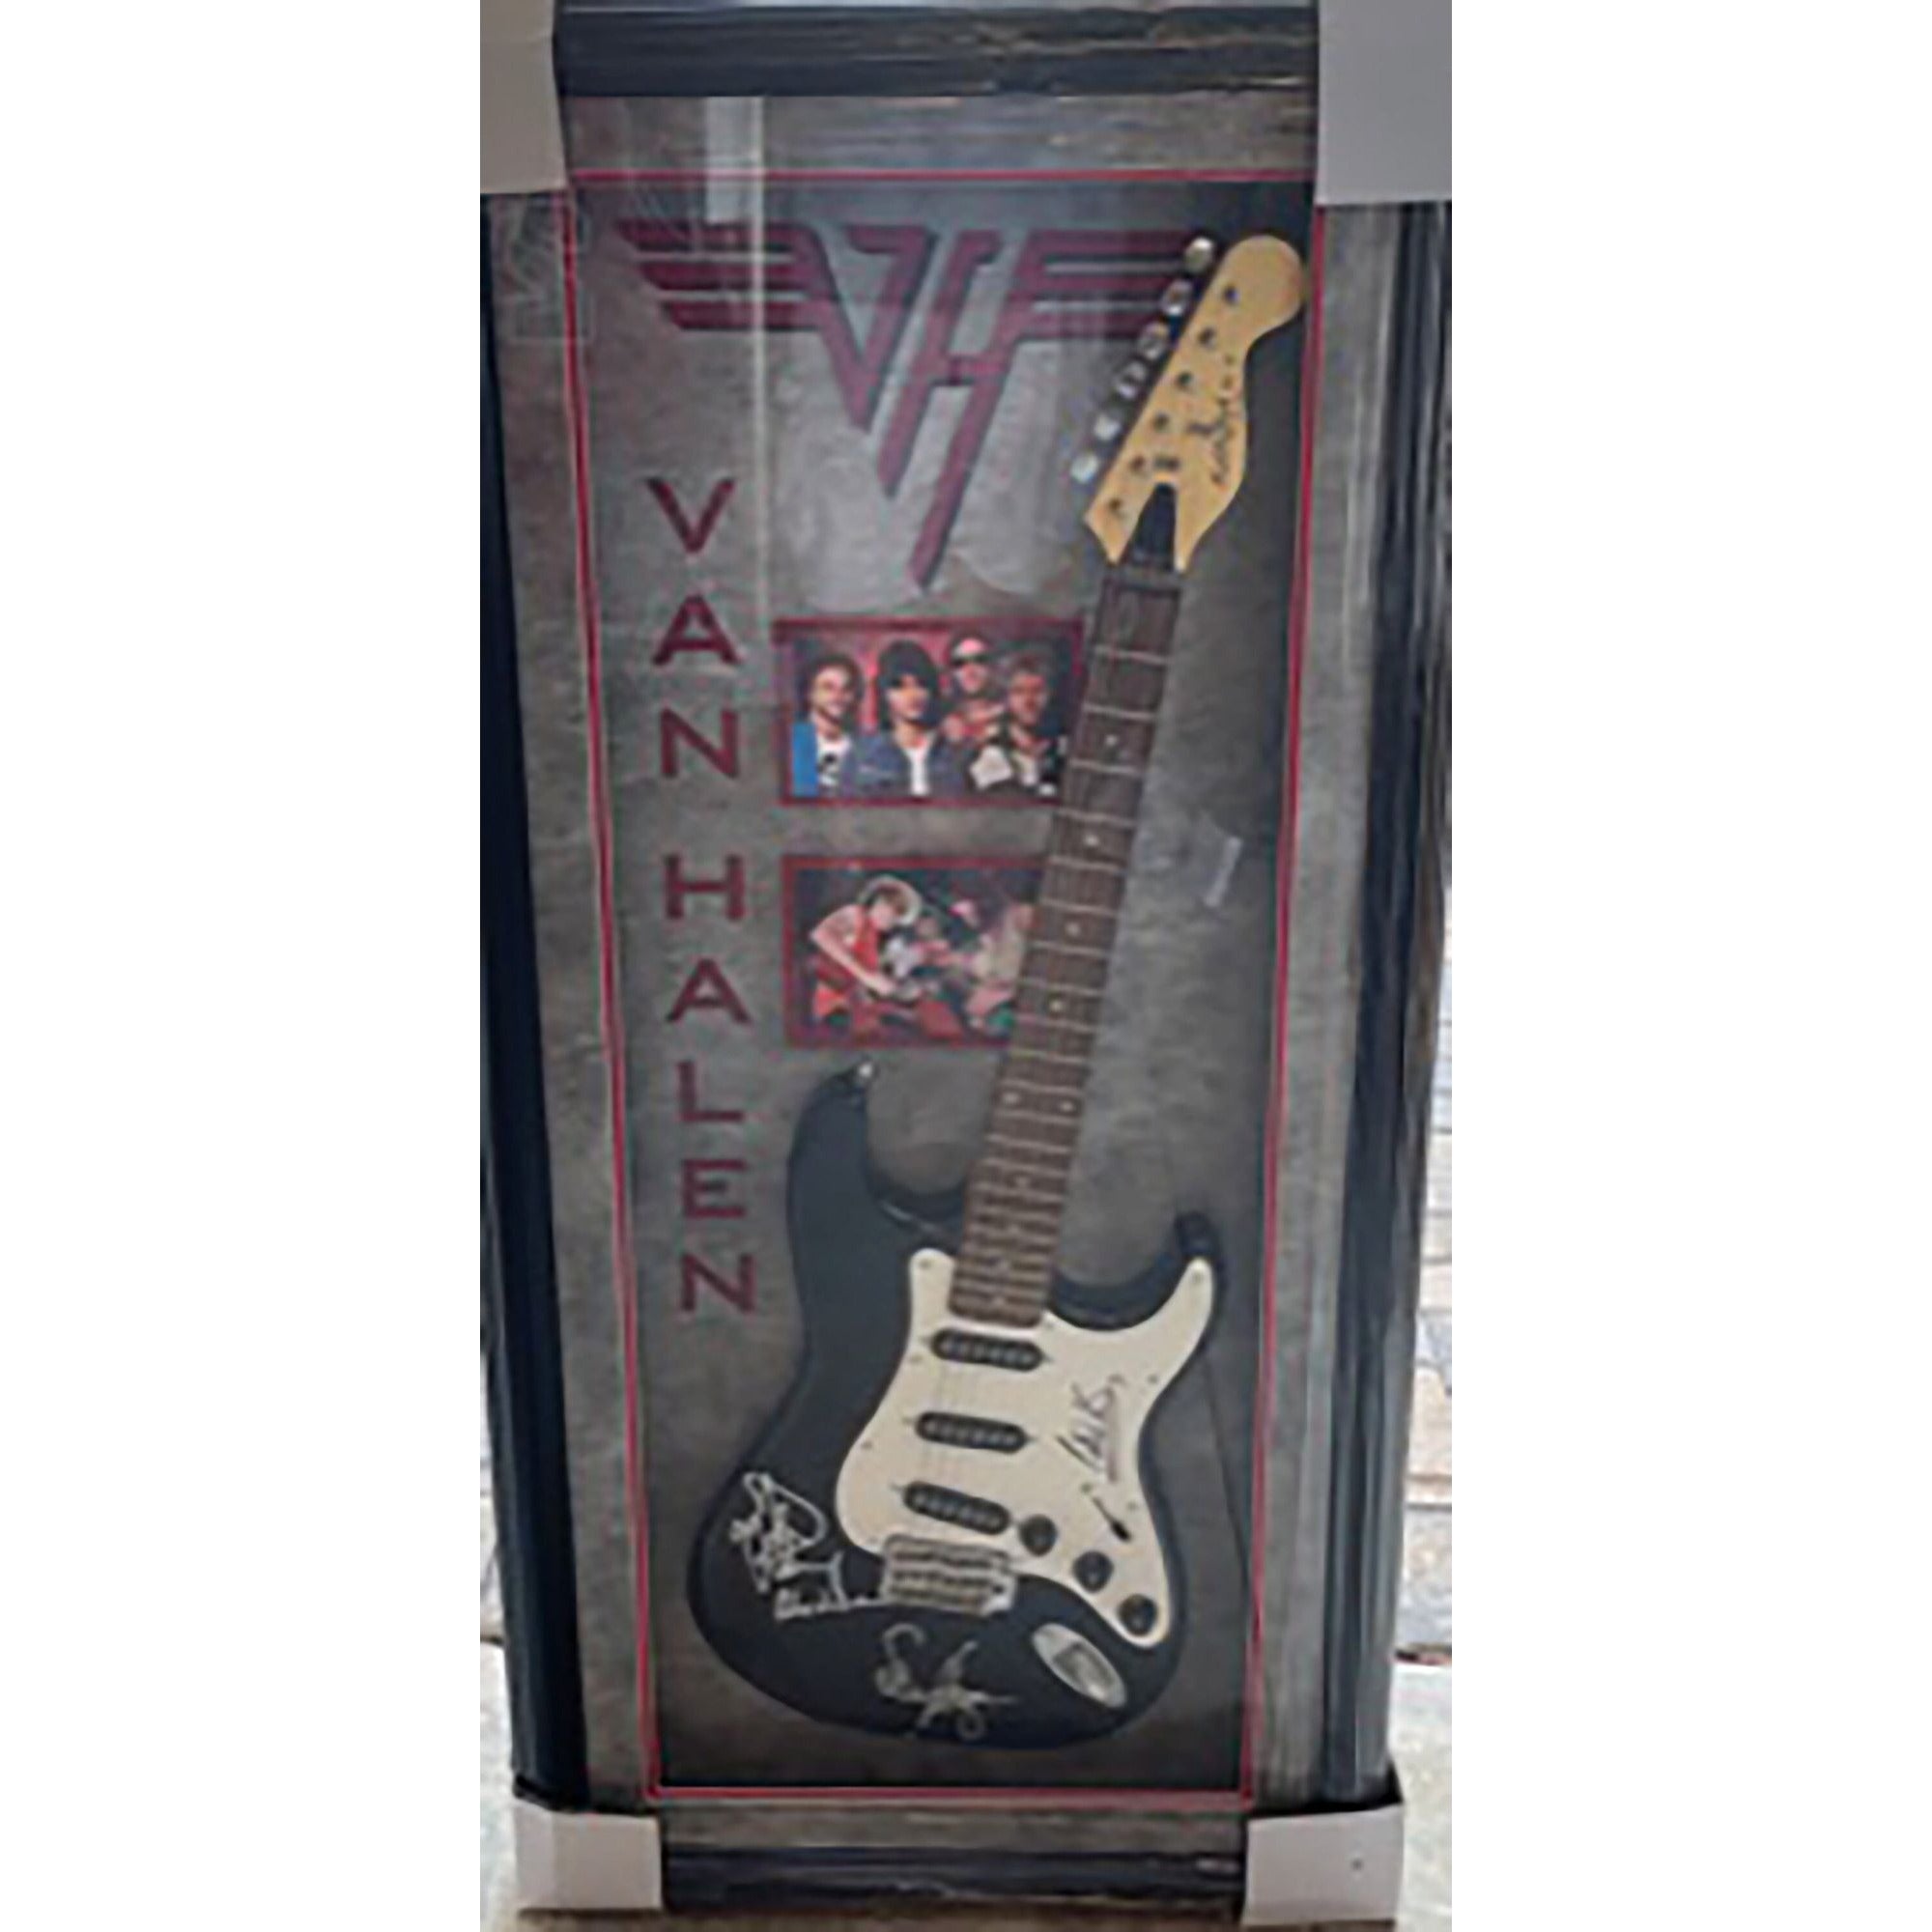 Van Halen group signed and framed guitar with proof